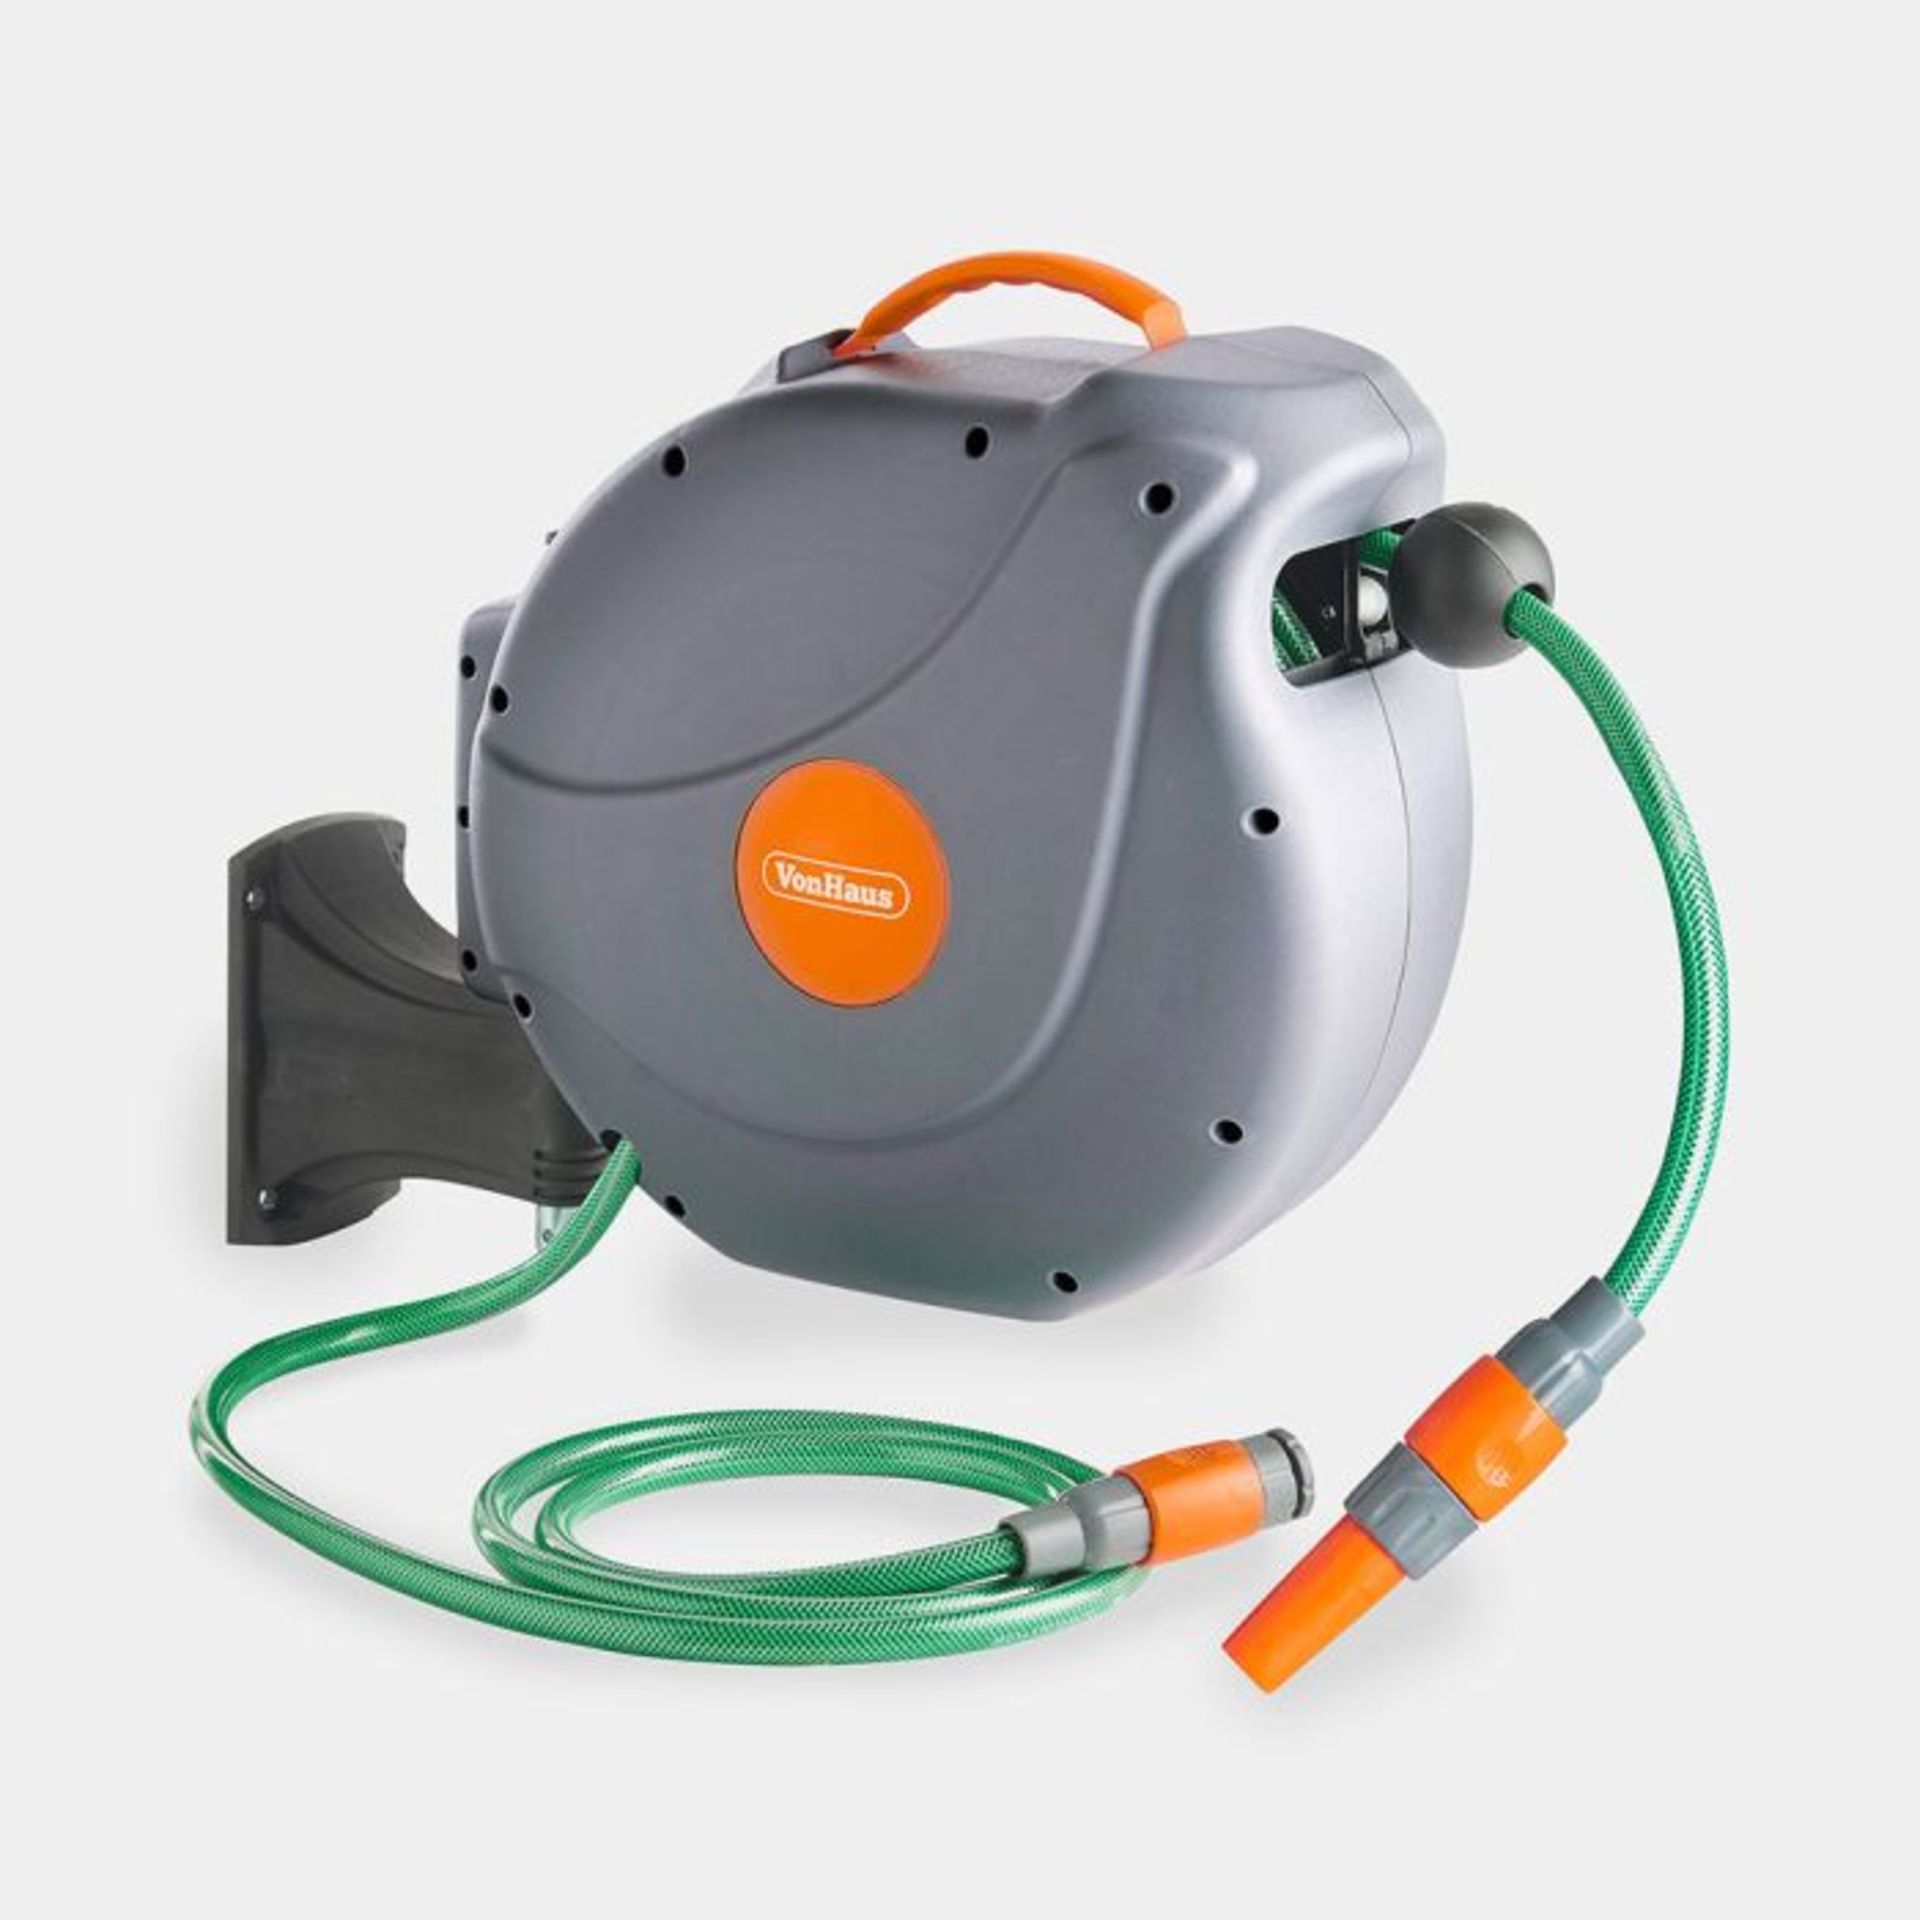 20m Garden Hose Reel. -ER34. Extending up to 20m in length, this anti-kink, tough and durable hose